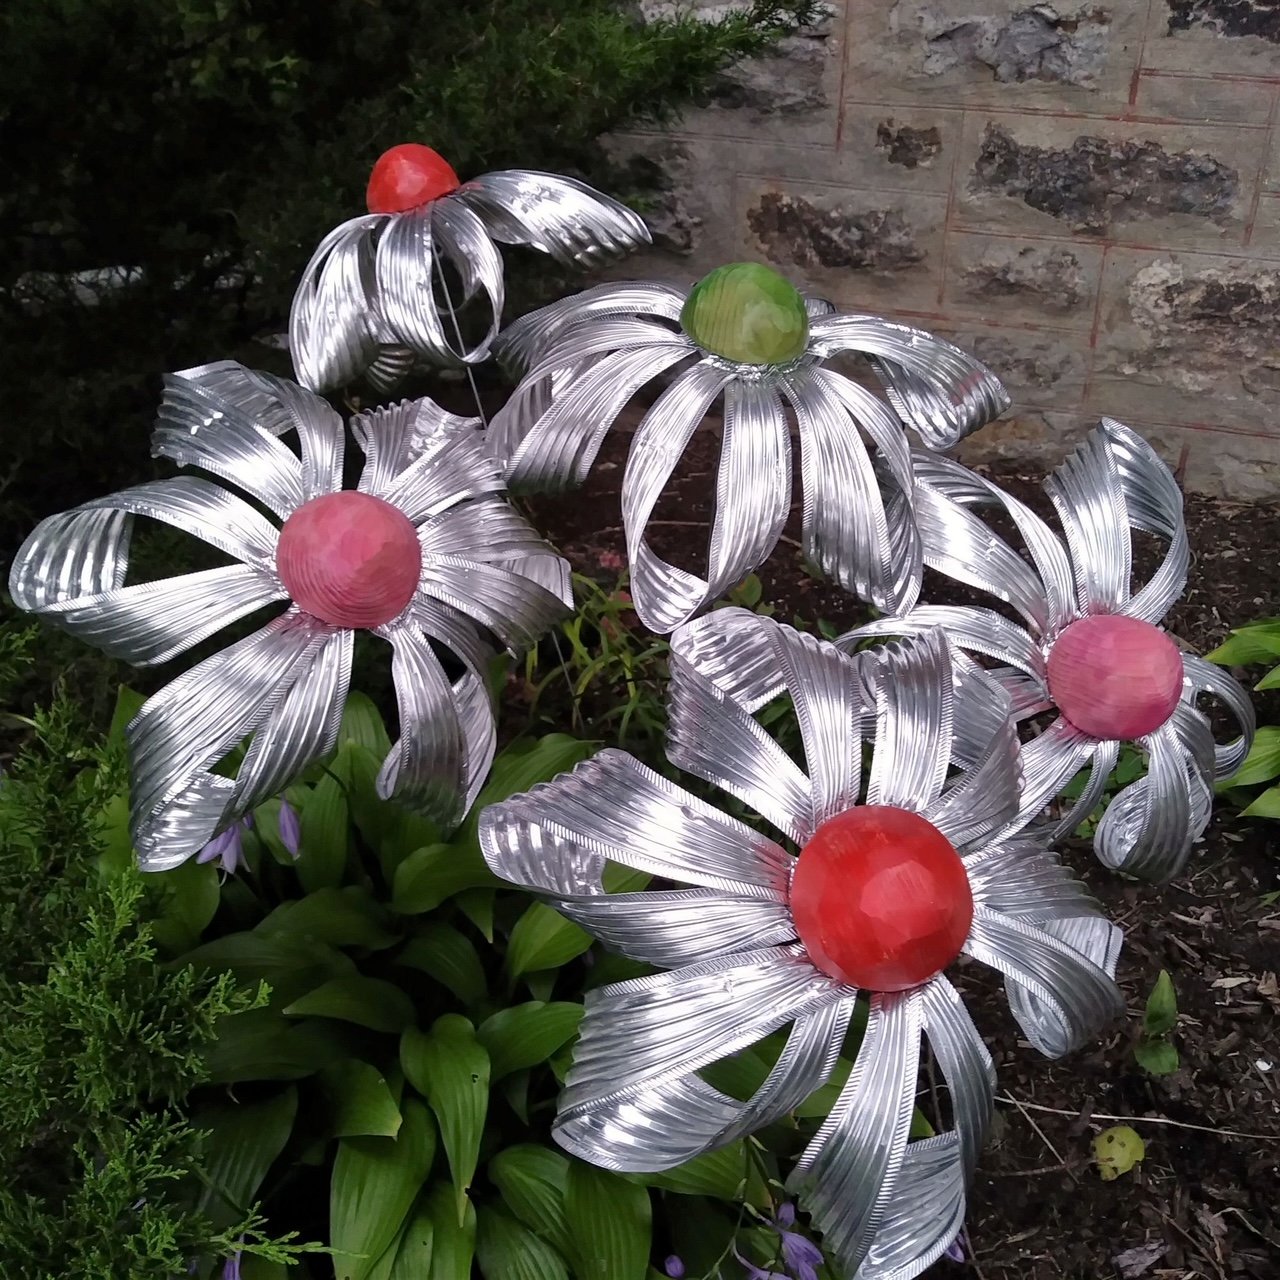 Artfully Recycled Dryer Duct Echinacea.jpg